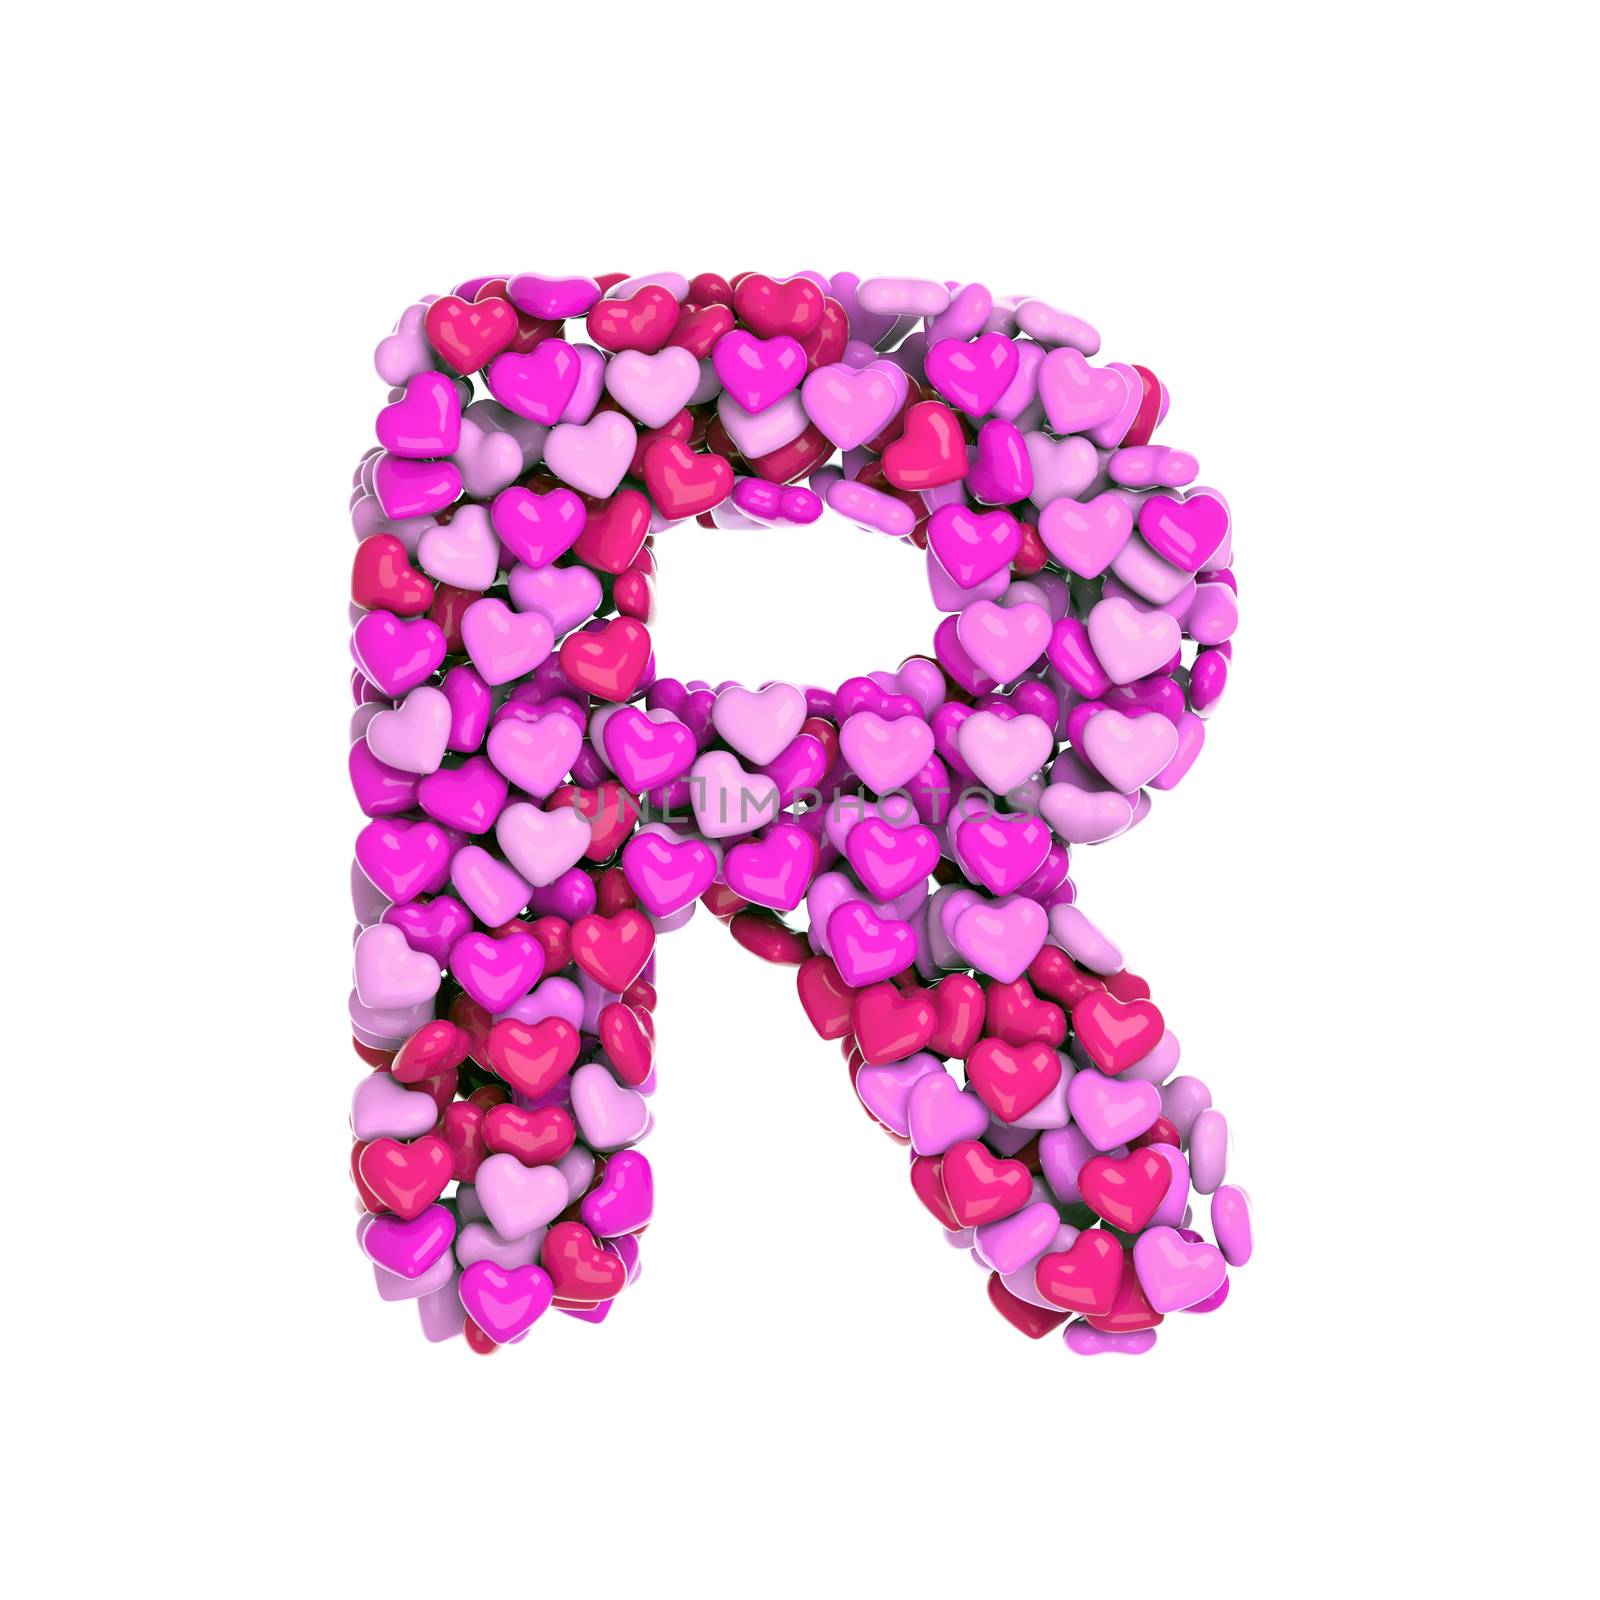 Valentine letter R - Capital 3d pink hearts font isolated on white background. This alphabet is perfect for creative illustrations related but not limited to Love, passion, wedding...